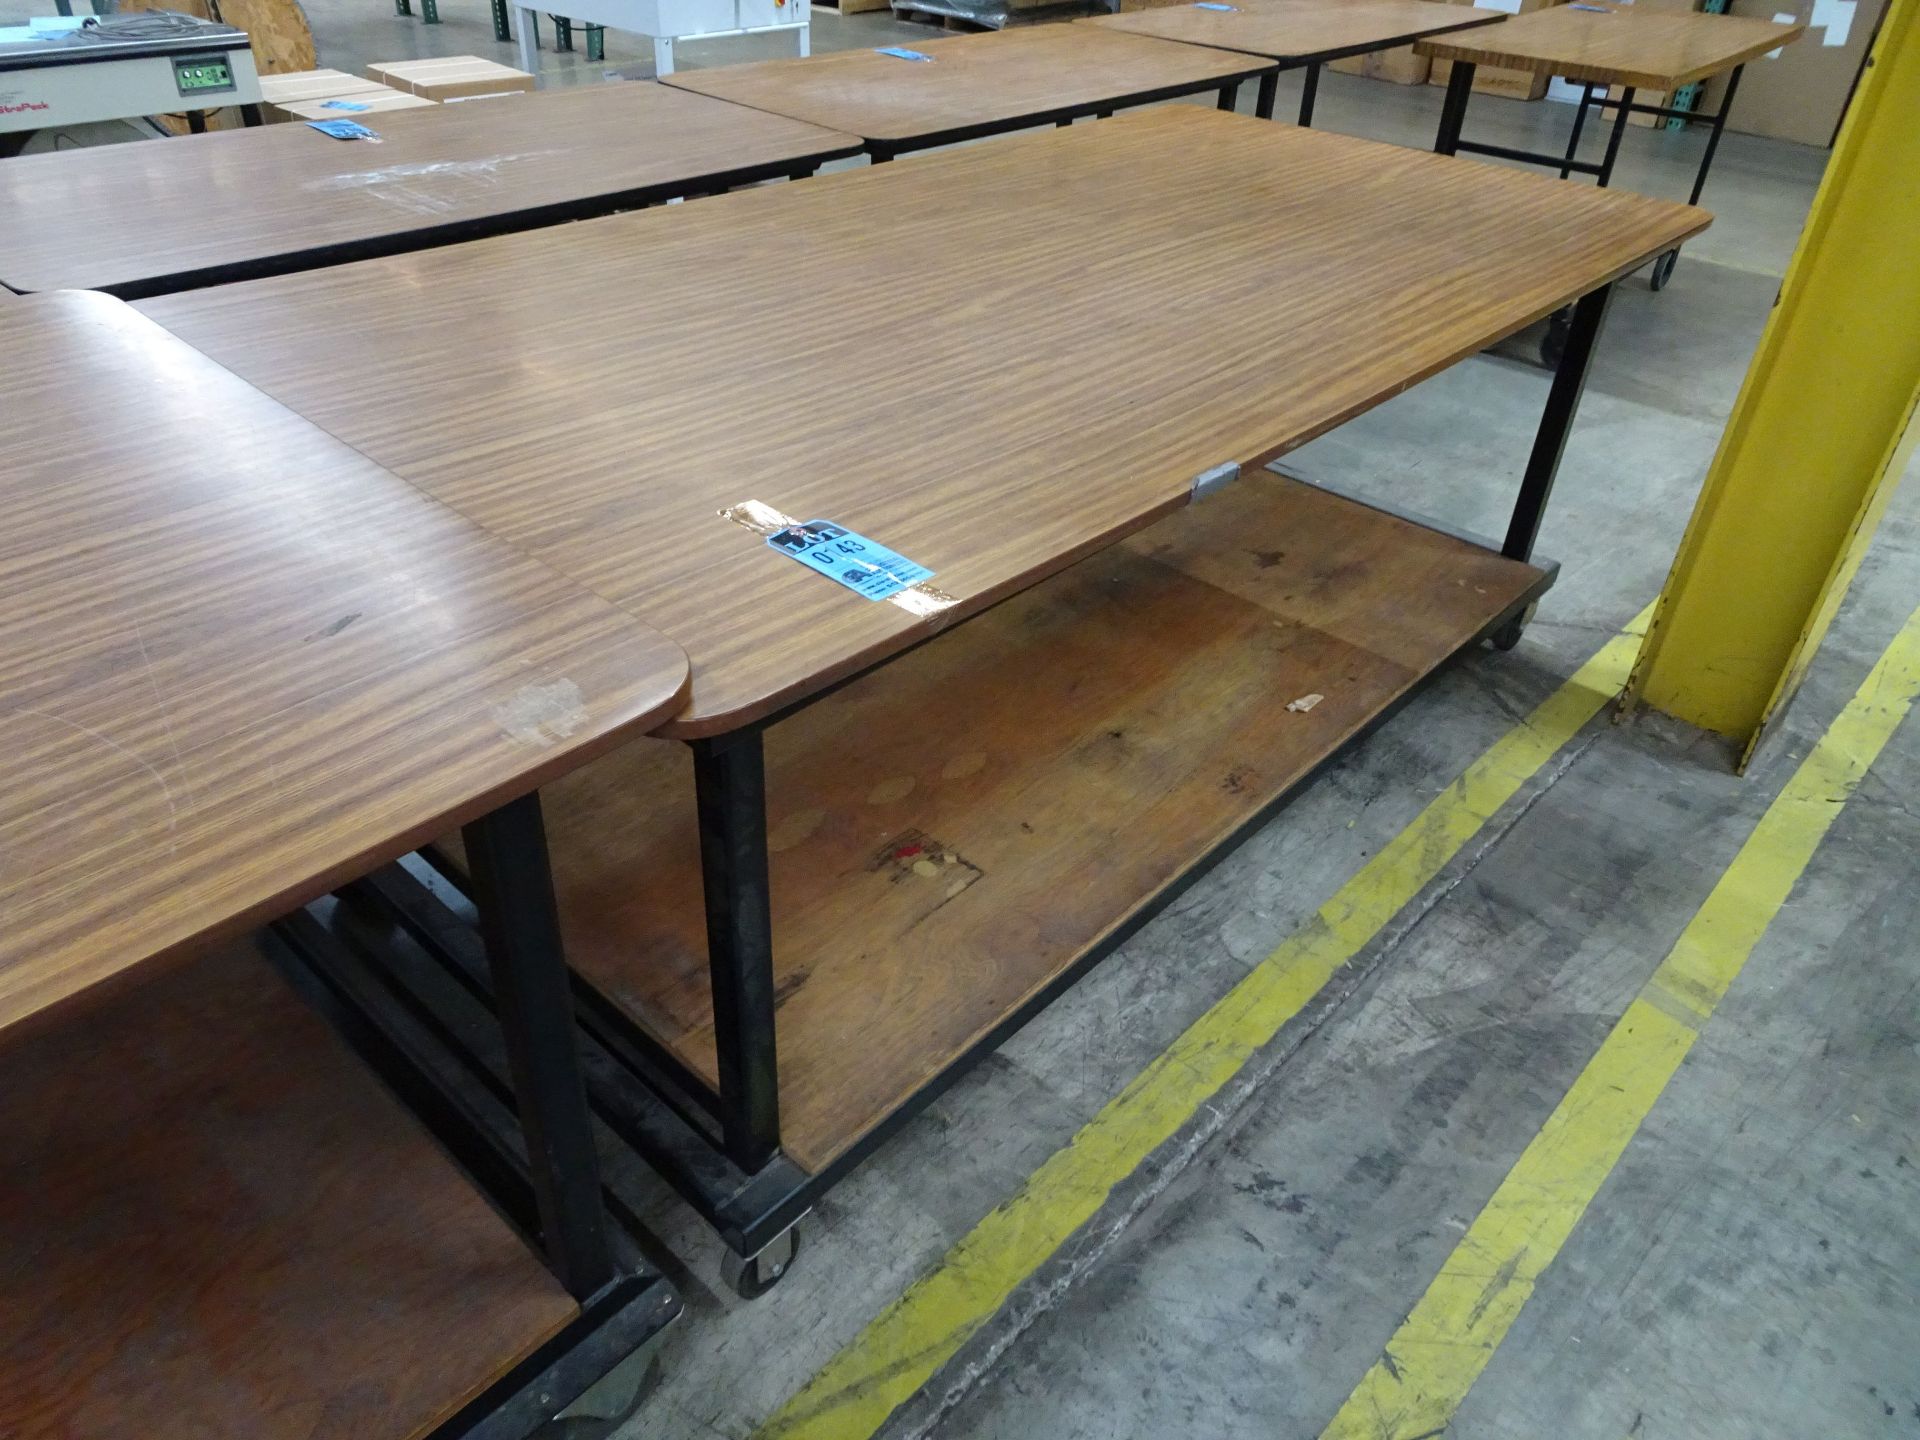 48" X 96" PORTABLE TABLE - FORMICA TYPE TOP